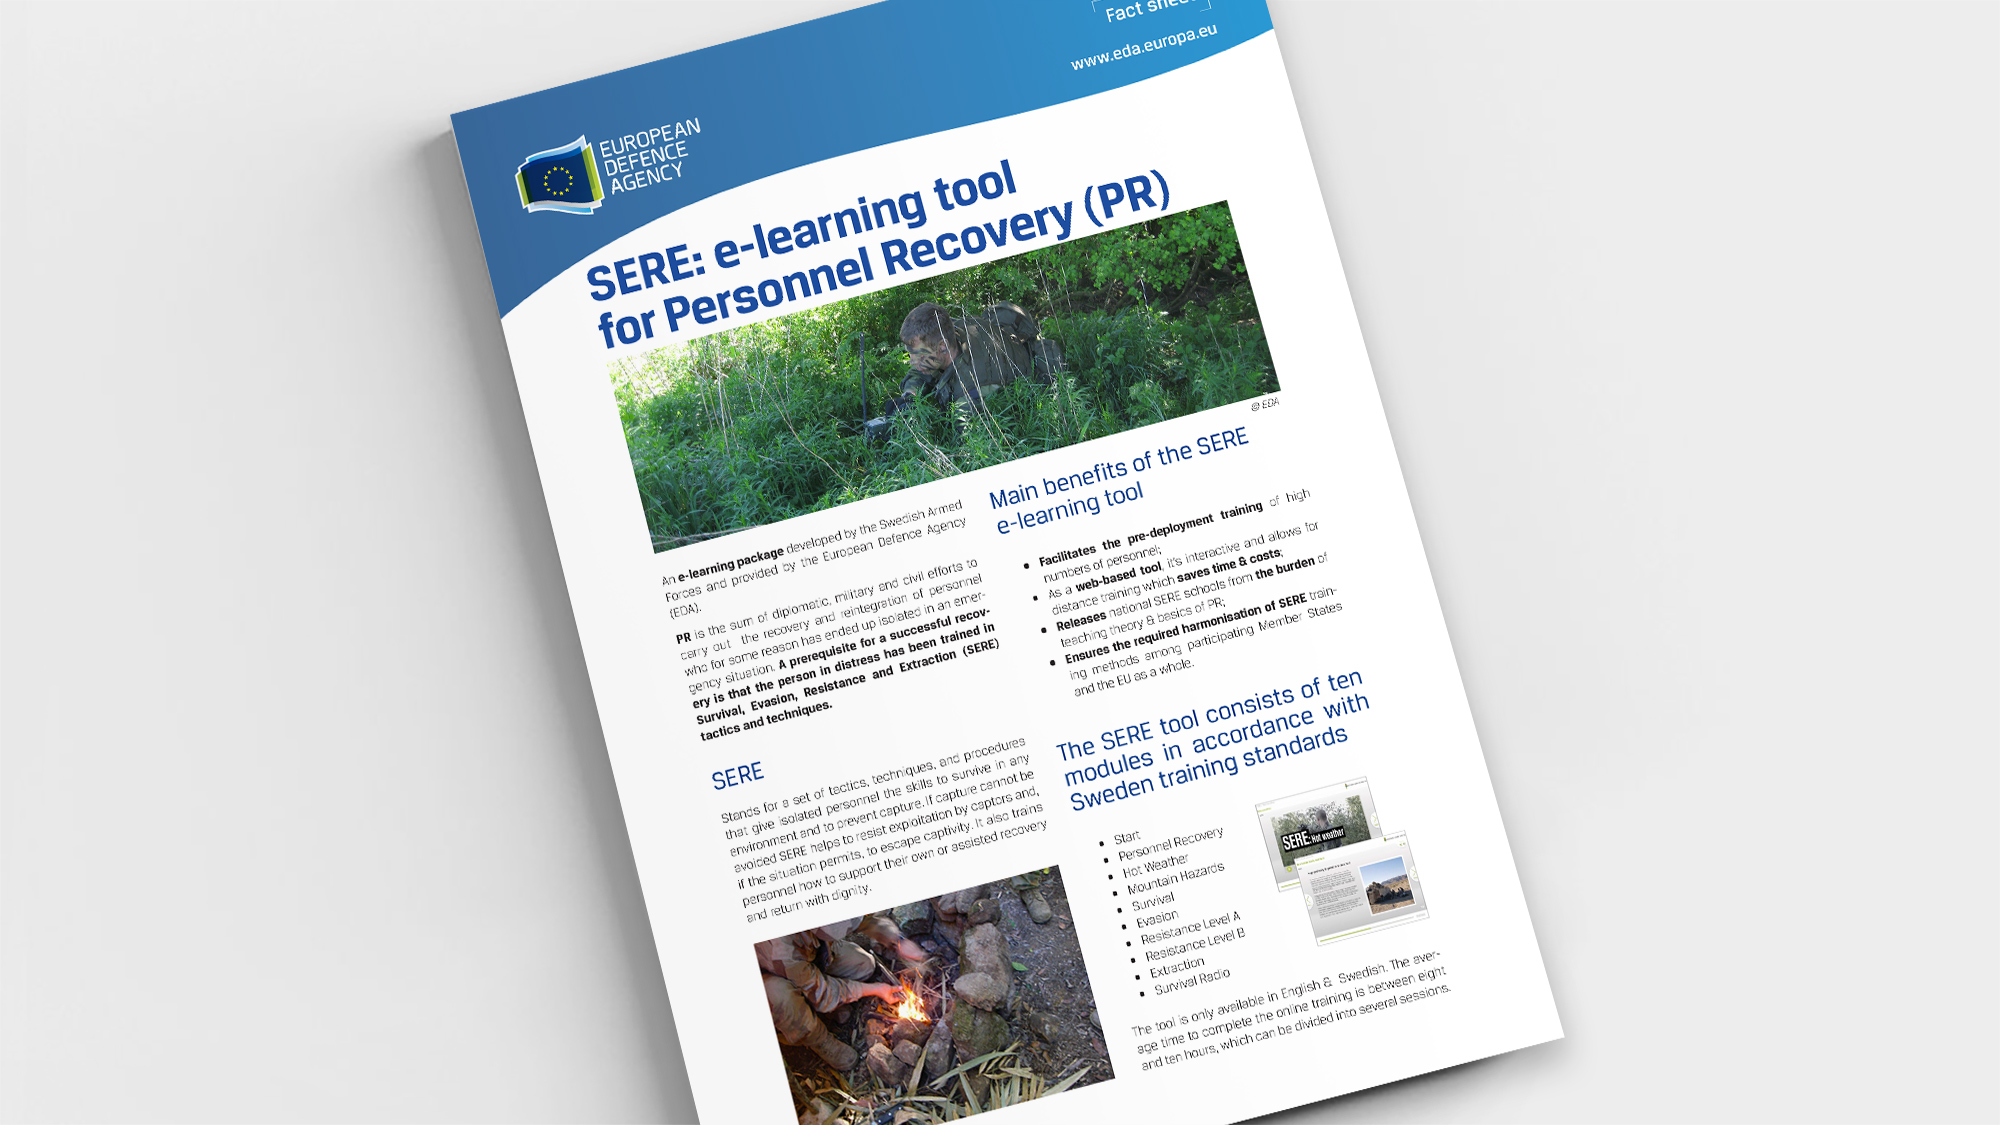 Factsheet SERE e-learning tool for Personnel Recovery